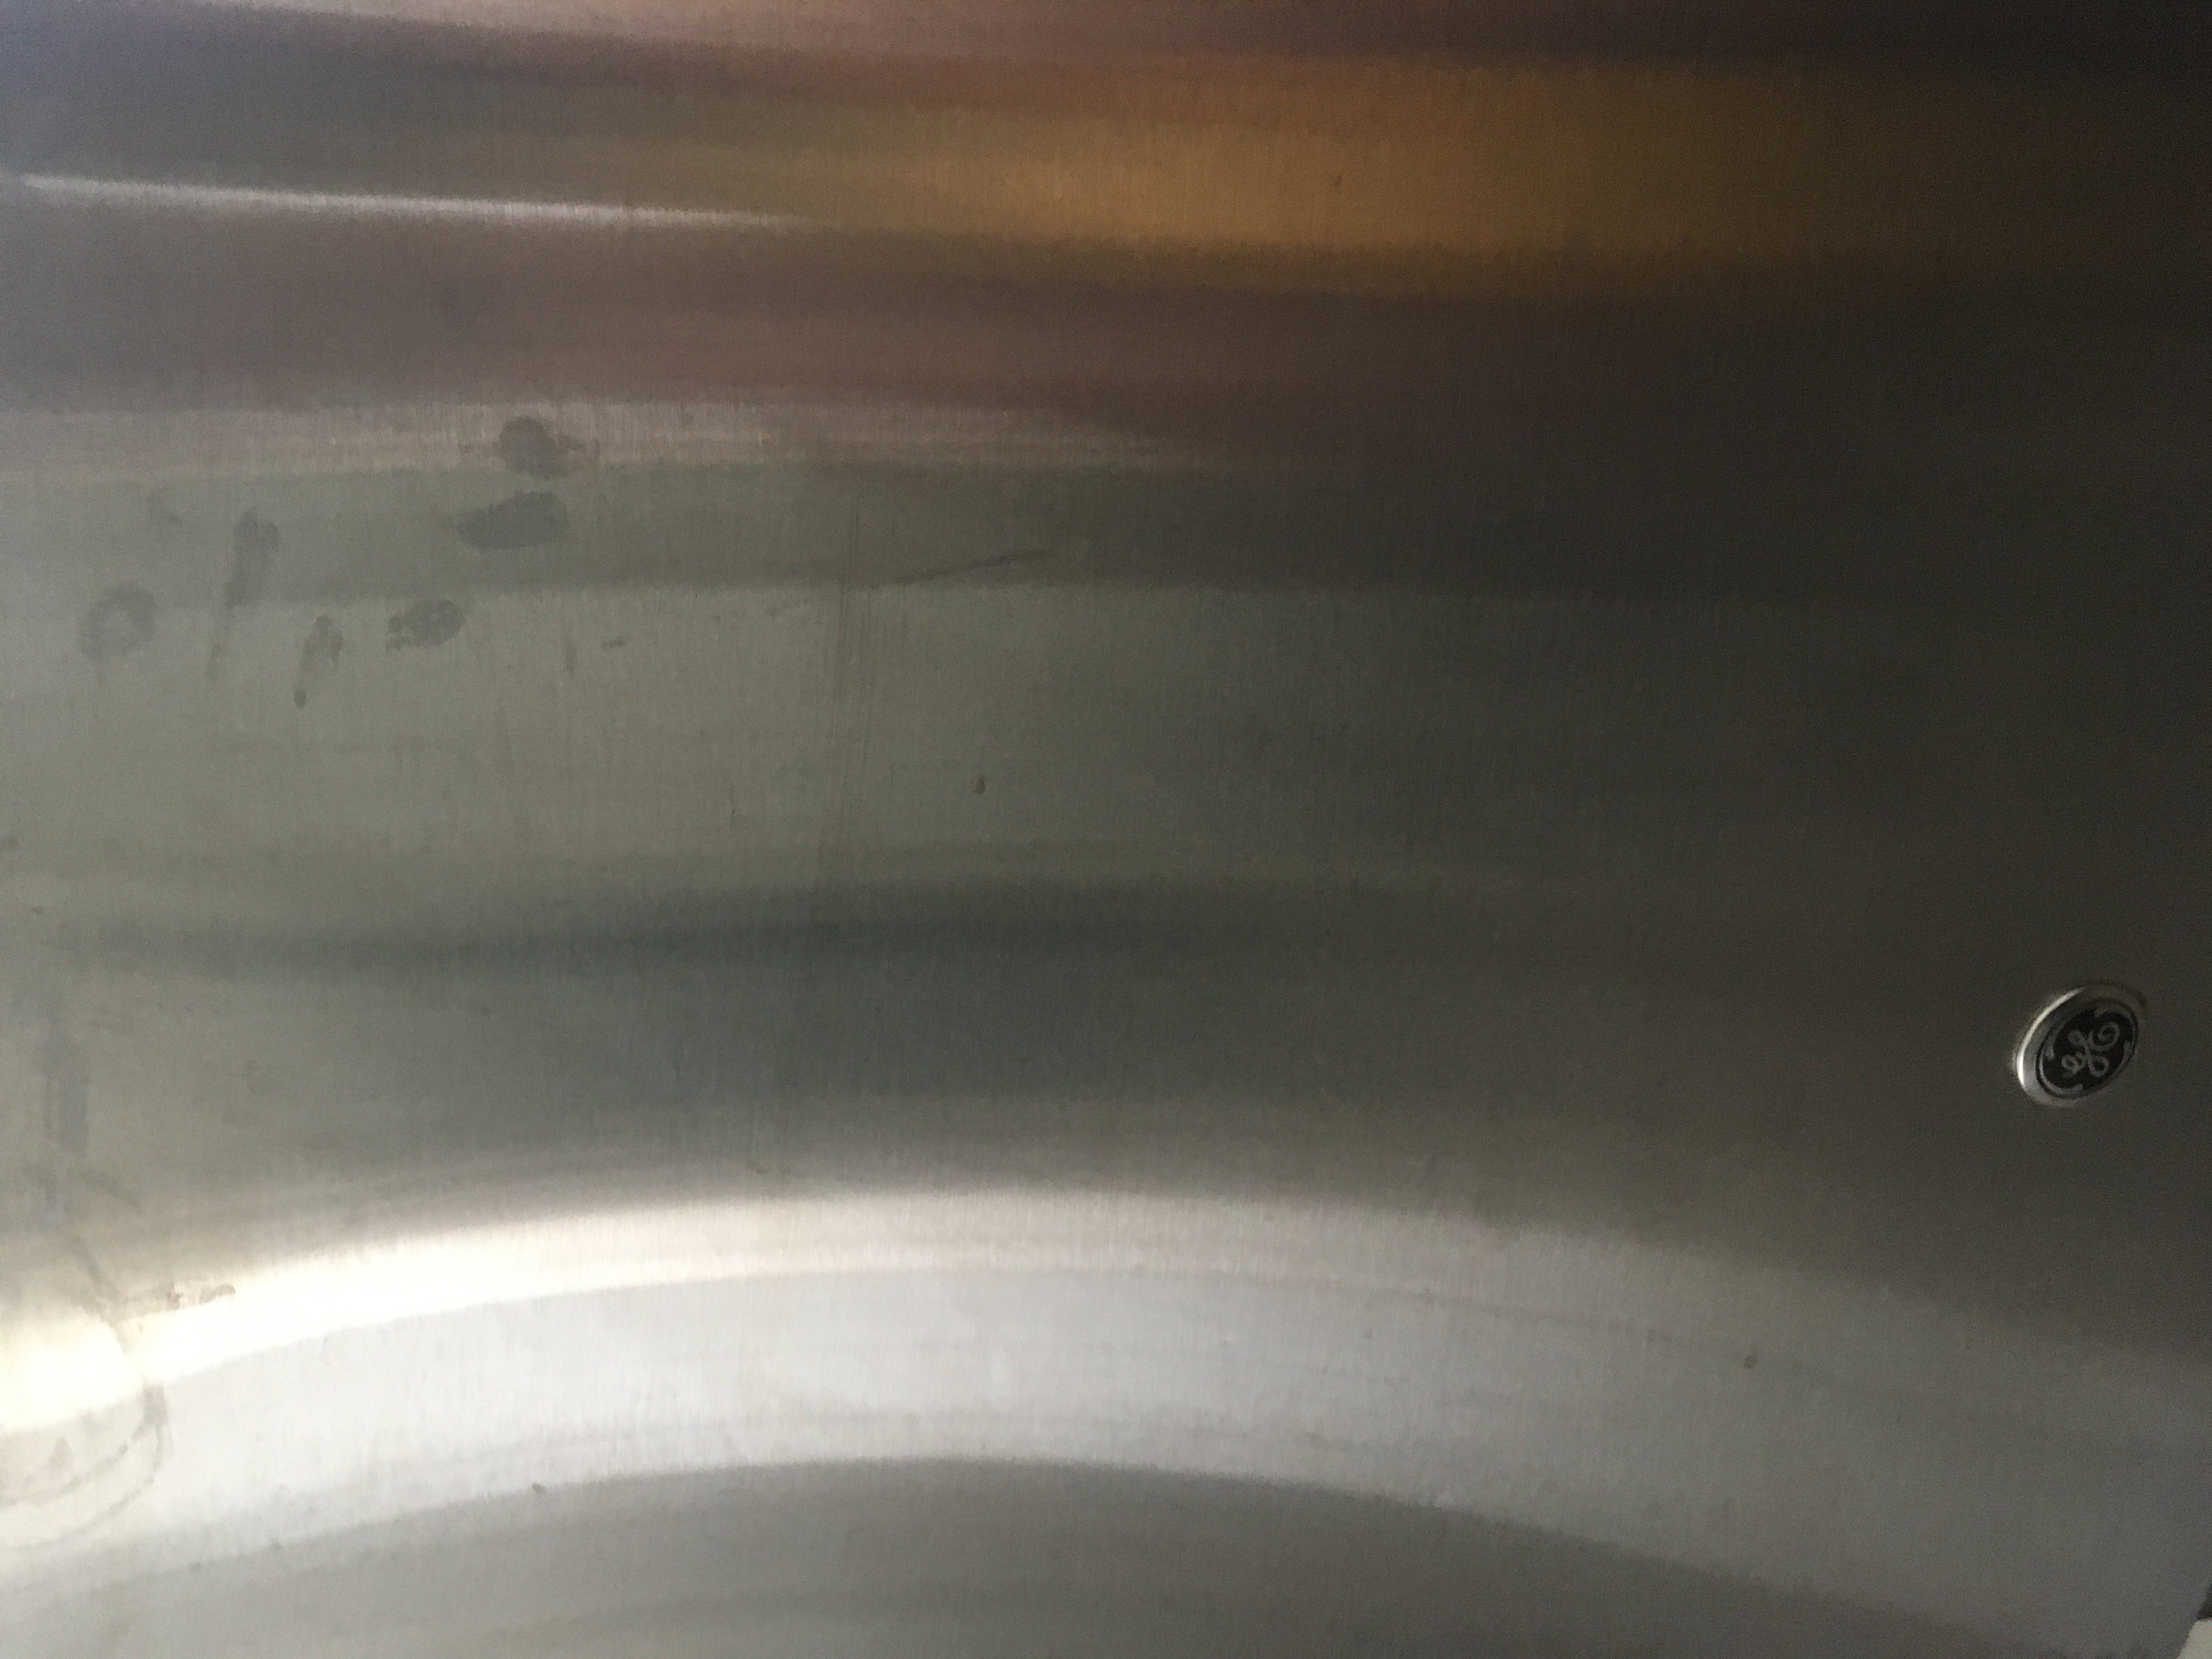 GE appliance poor quality finish less than 1 year 